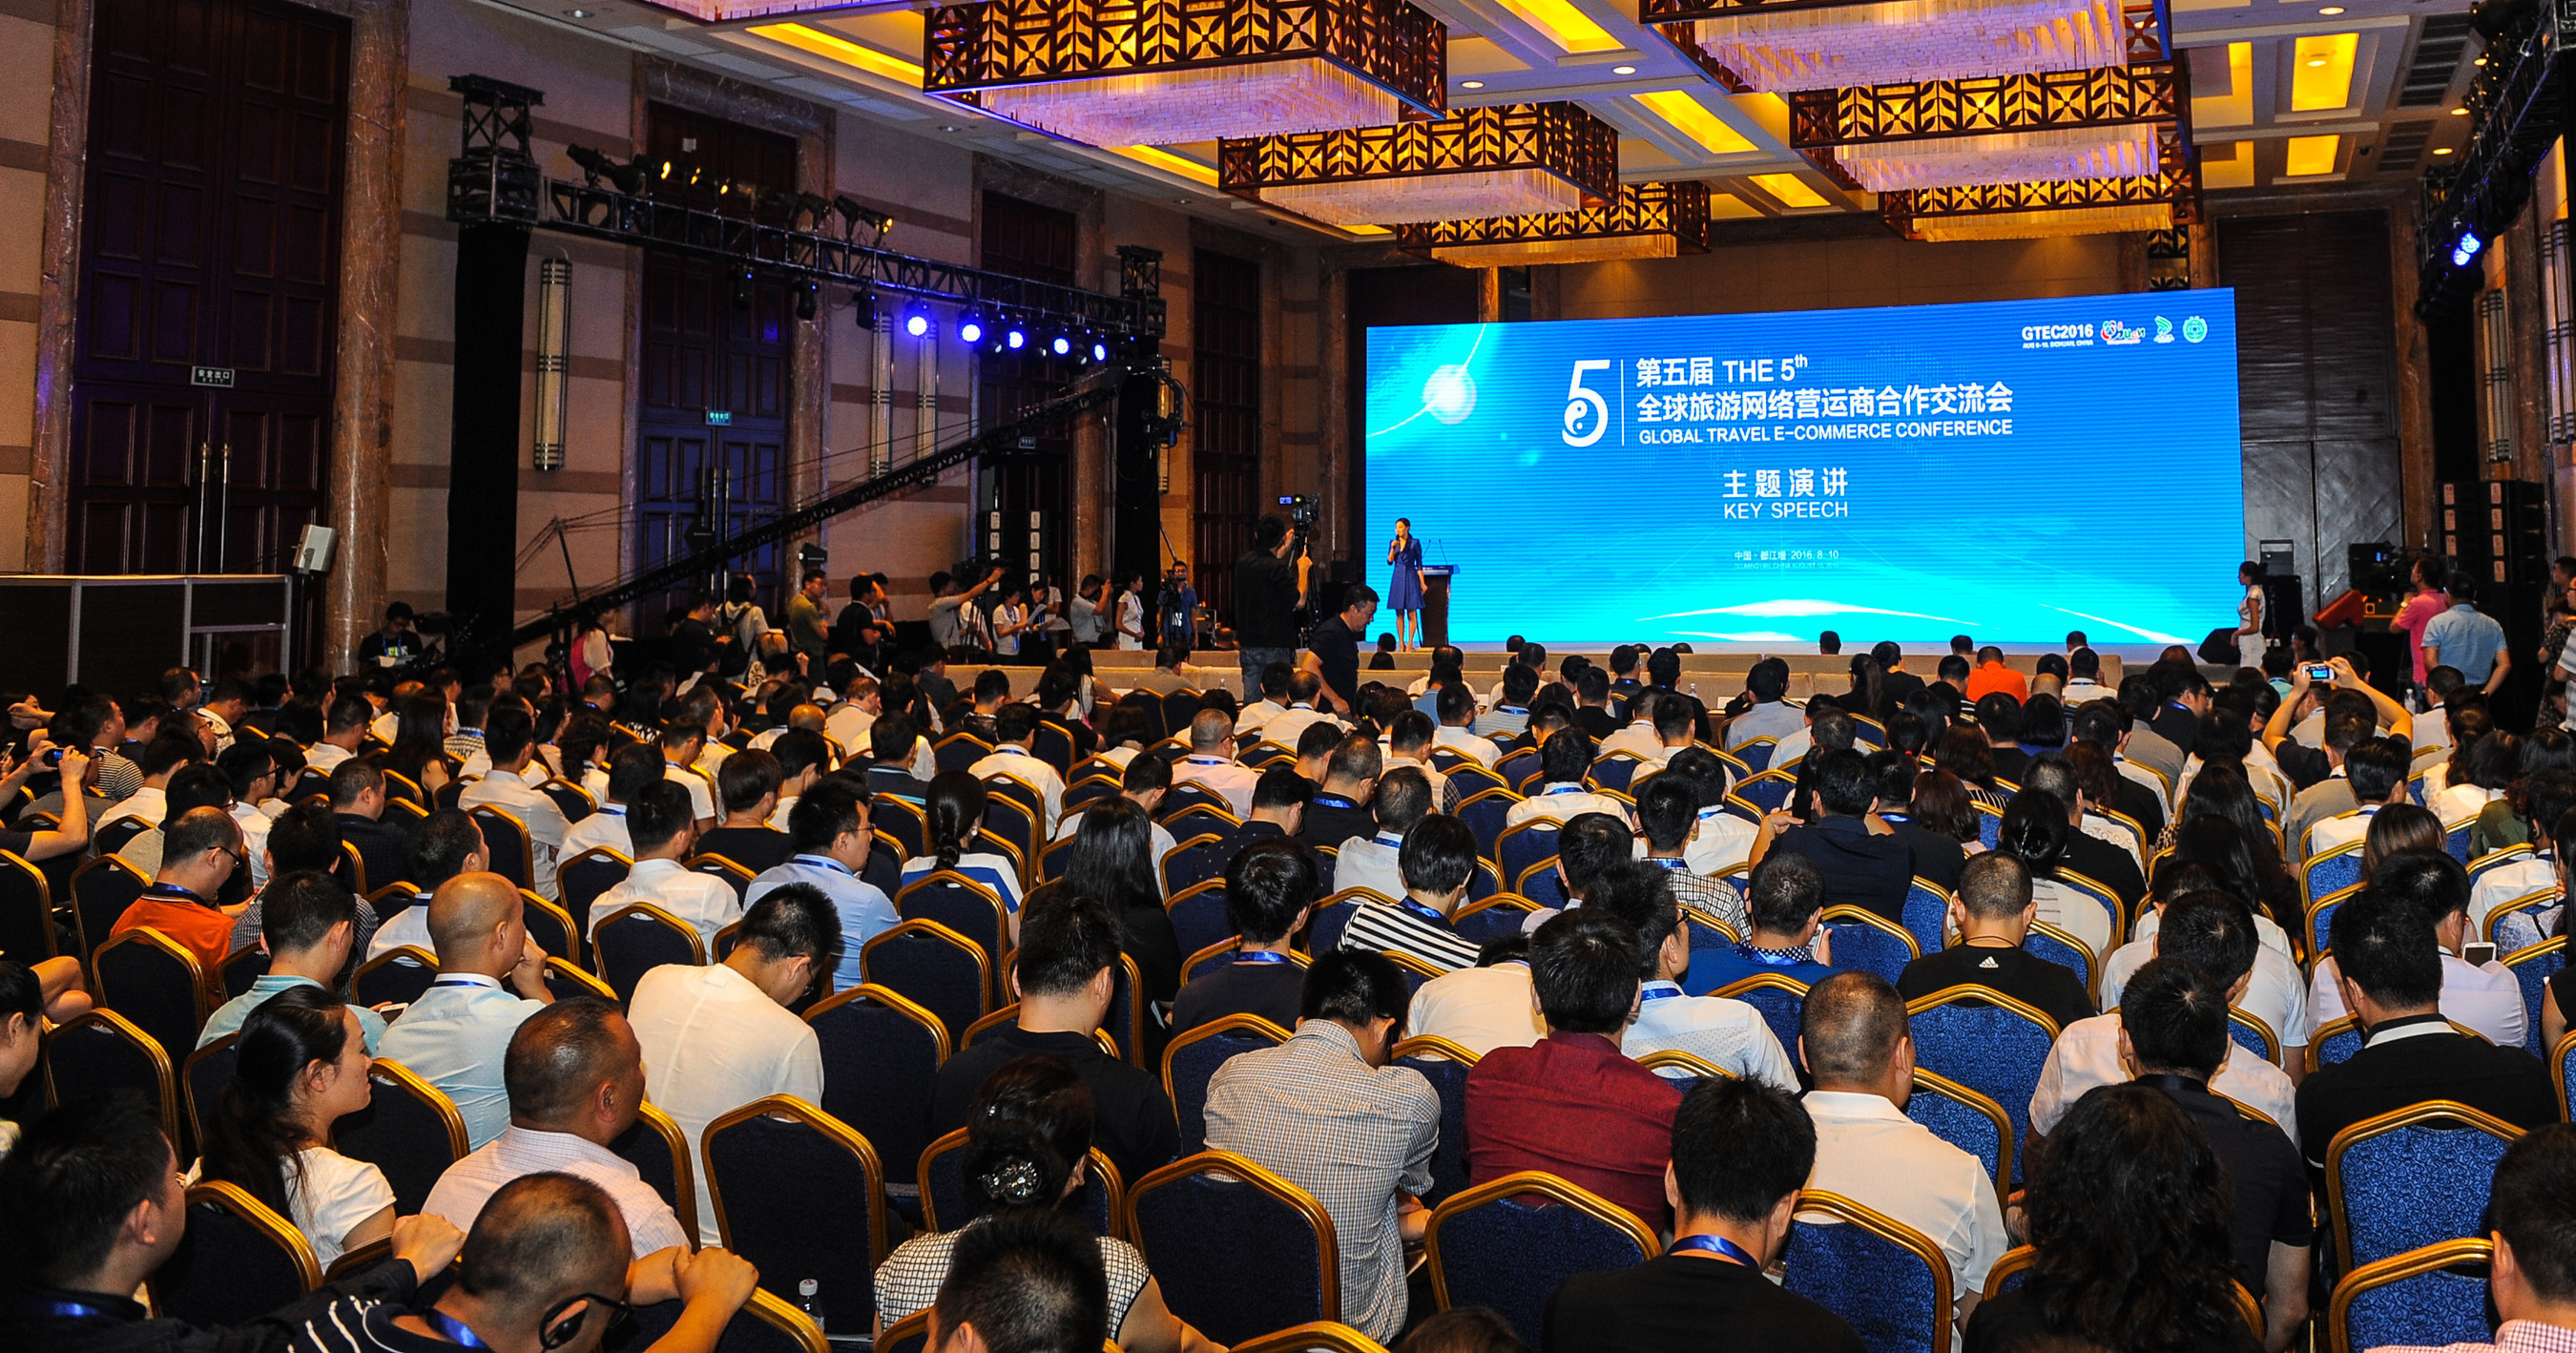 The 5th Global Travel E-commerce Conference